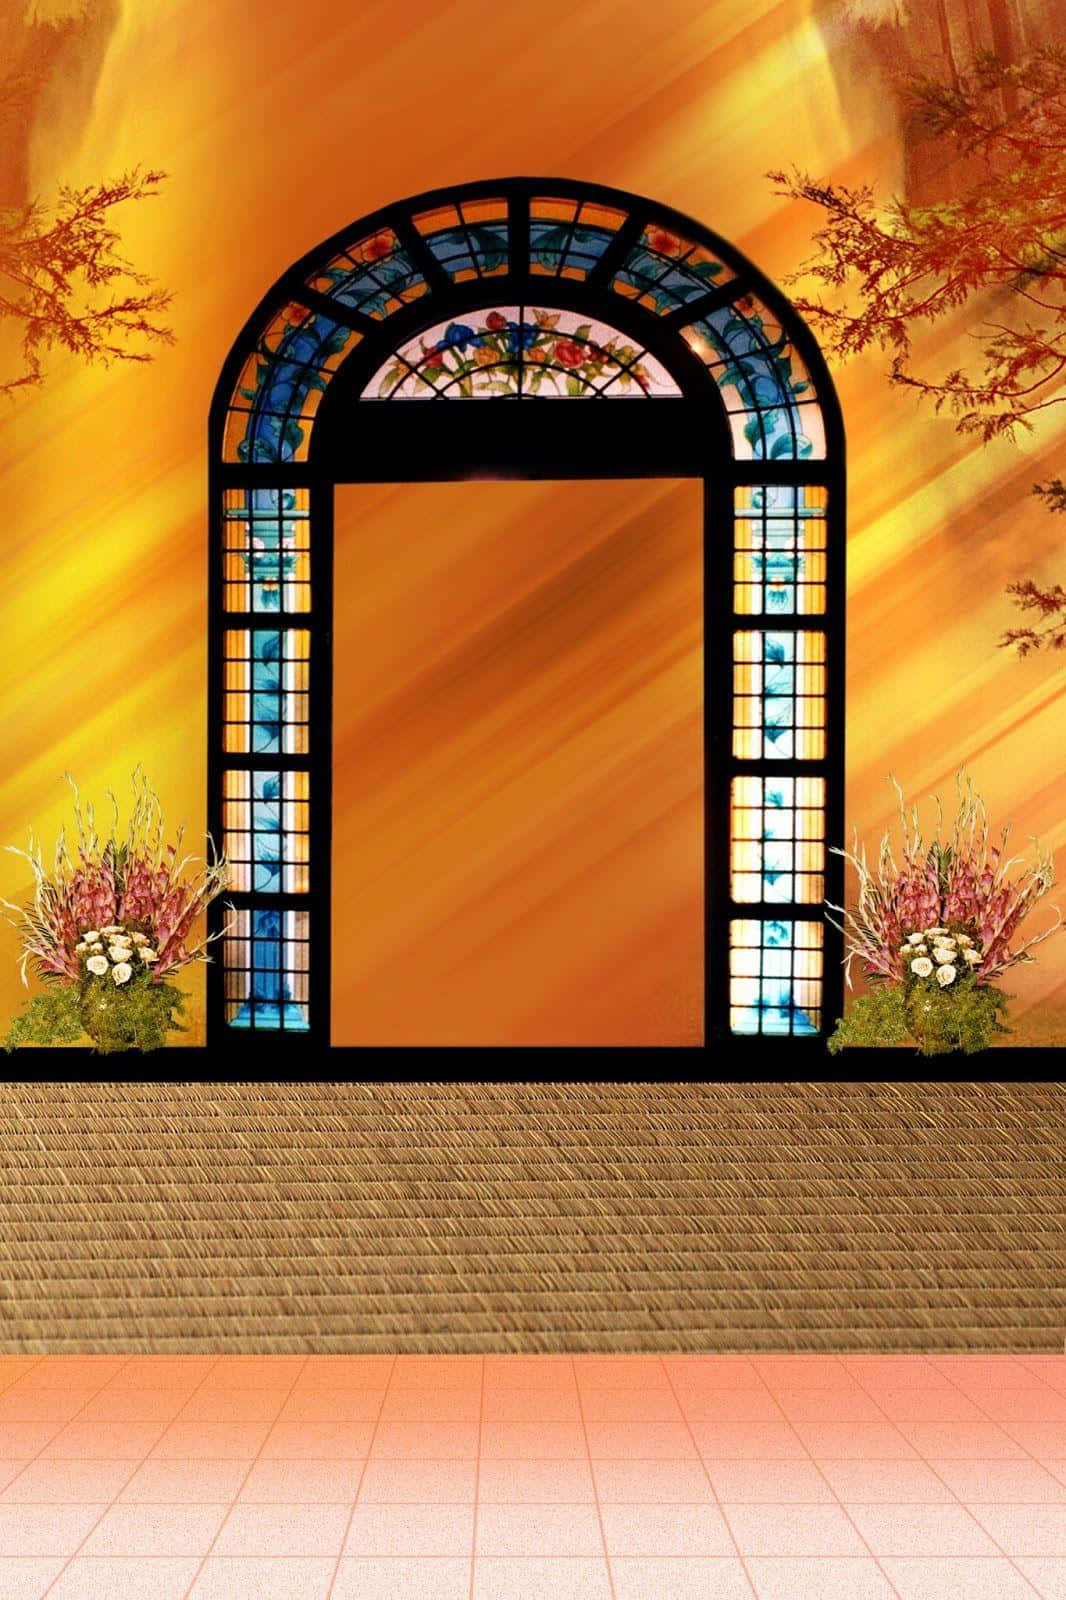 A Stained Glass Window In A Room